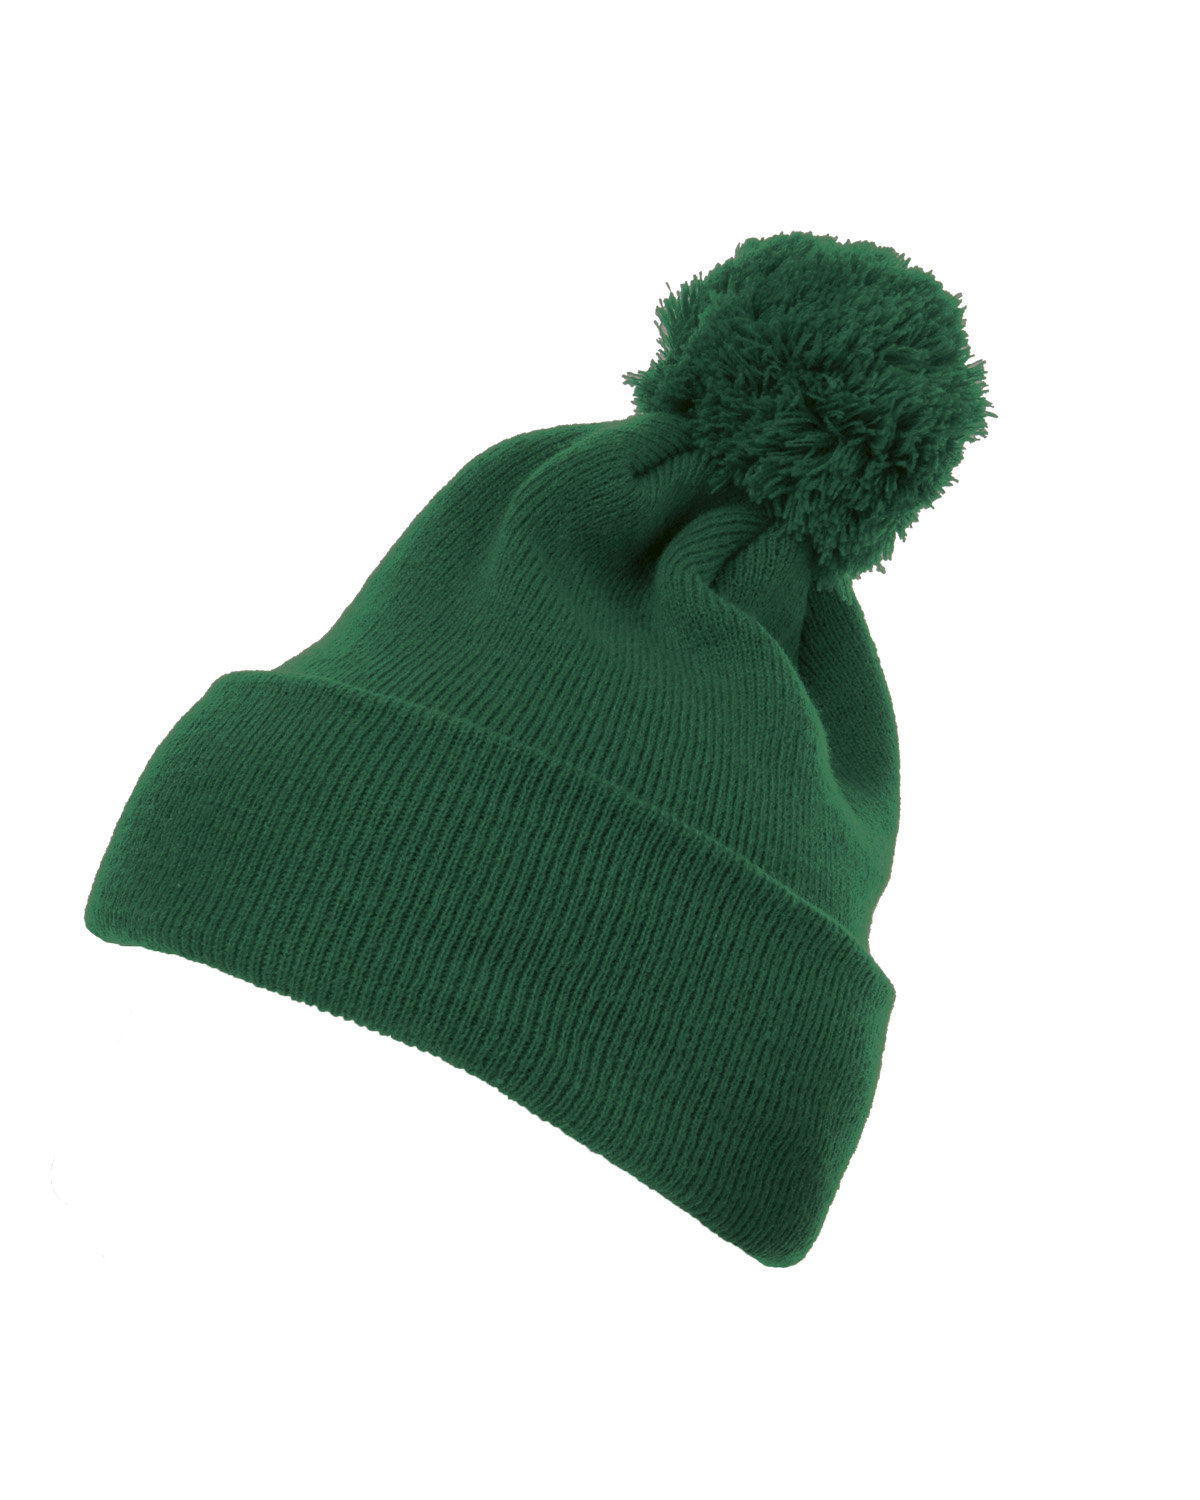 Yupoong Cuffed Knit alphabroder with Pom Pom | Hat Beanie